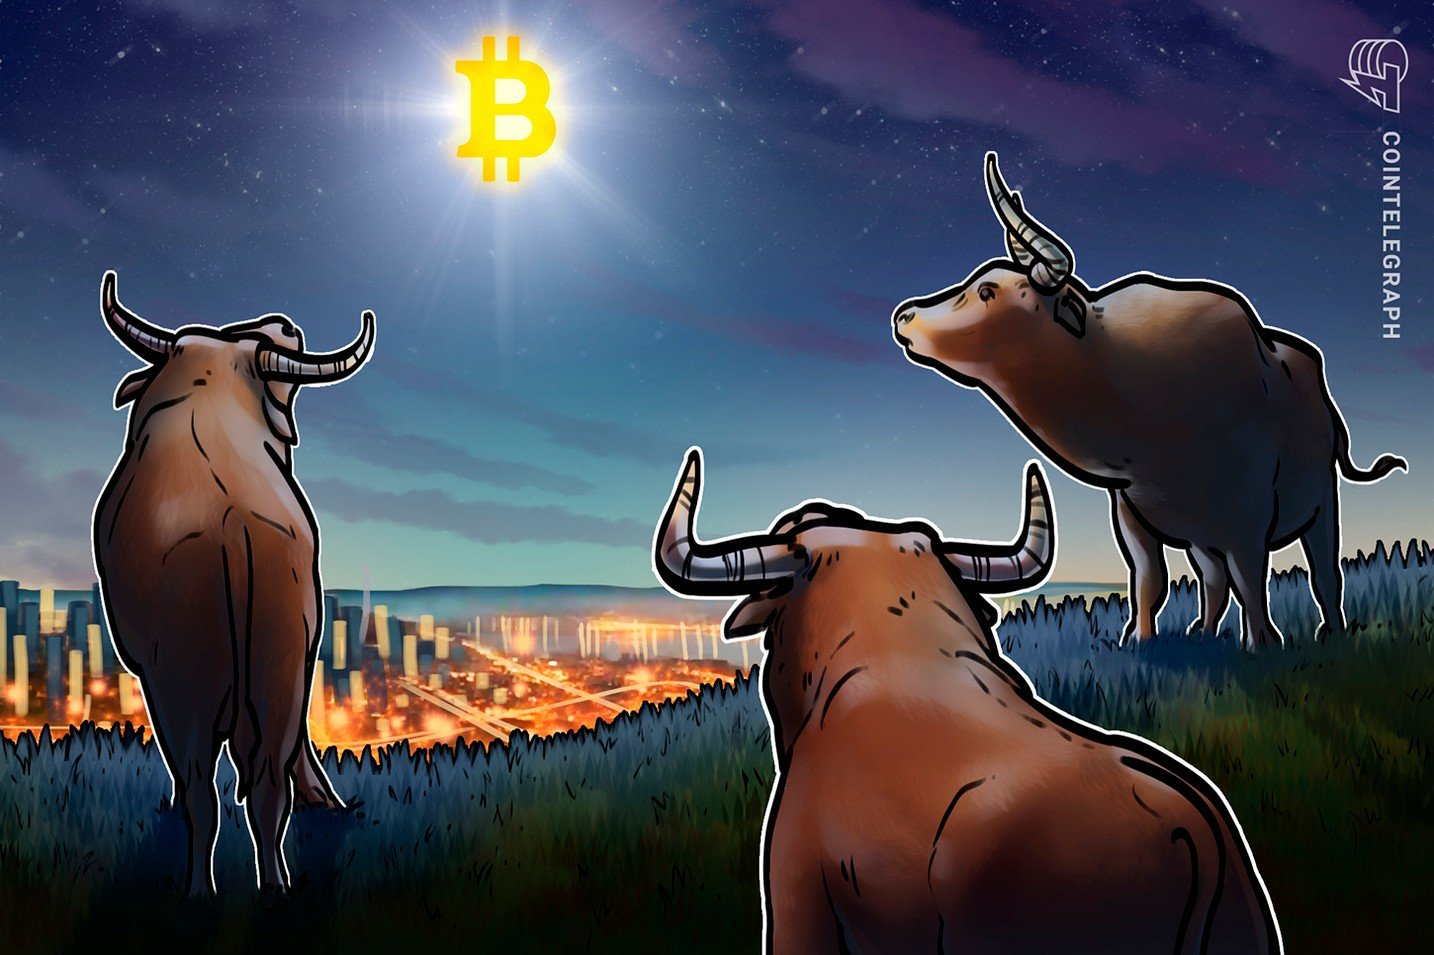 Bitcoin traders' bullish bias holds firm even as BTC price dips to K